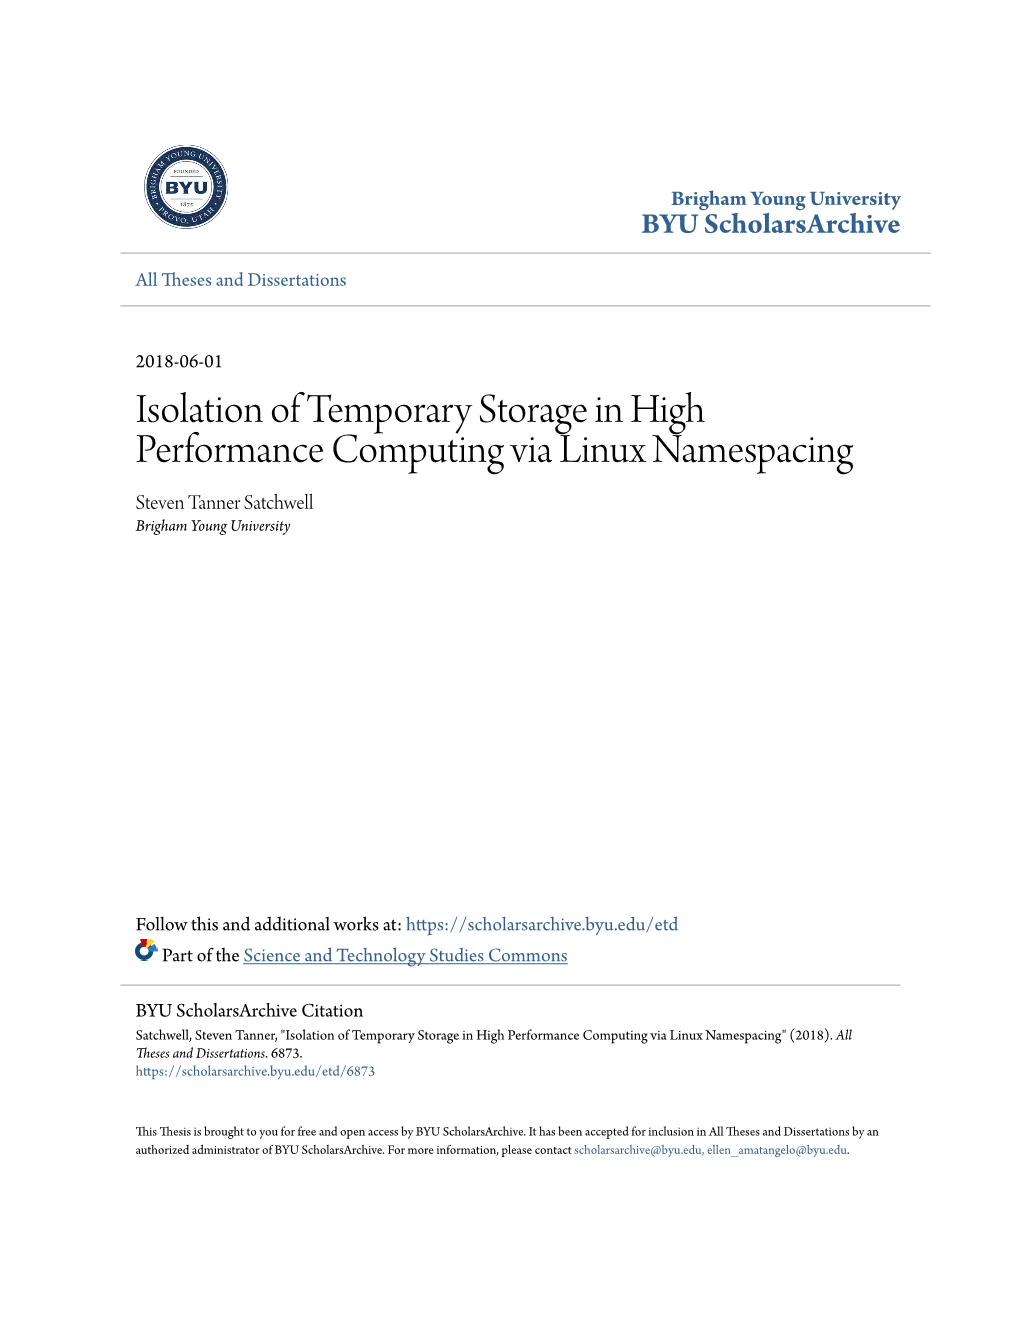 Isolation of Temporary Storage in High Performance Computing Via Linux Namespacing Steven Tanner Satchwell Brigham Young University